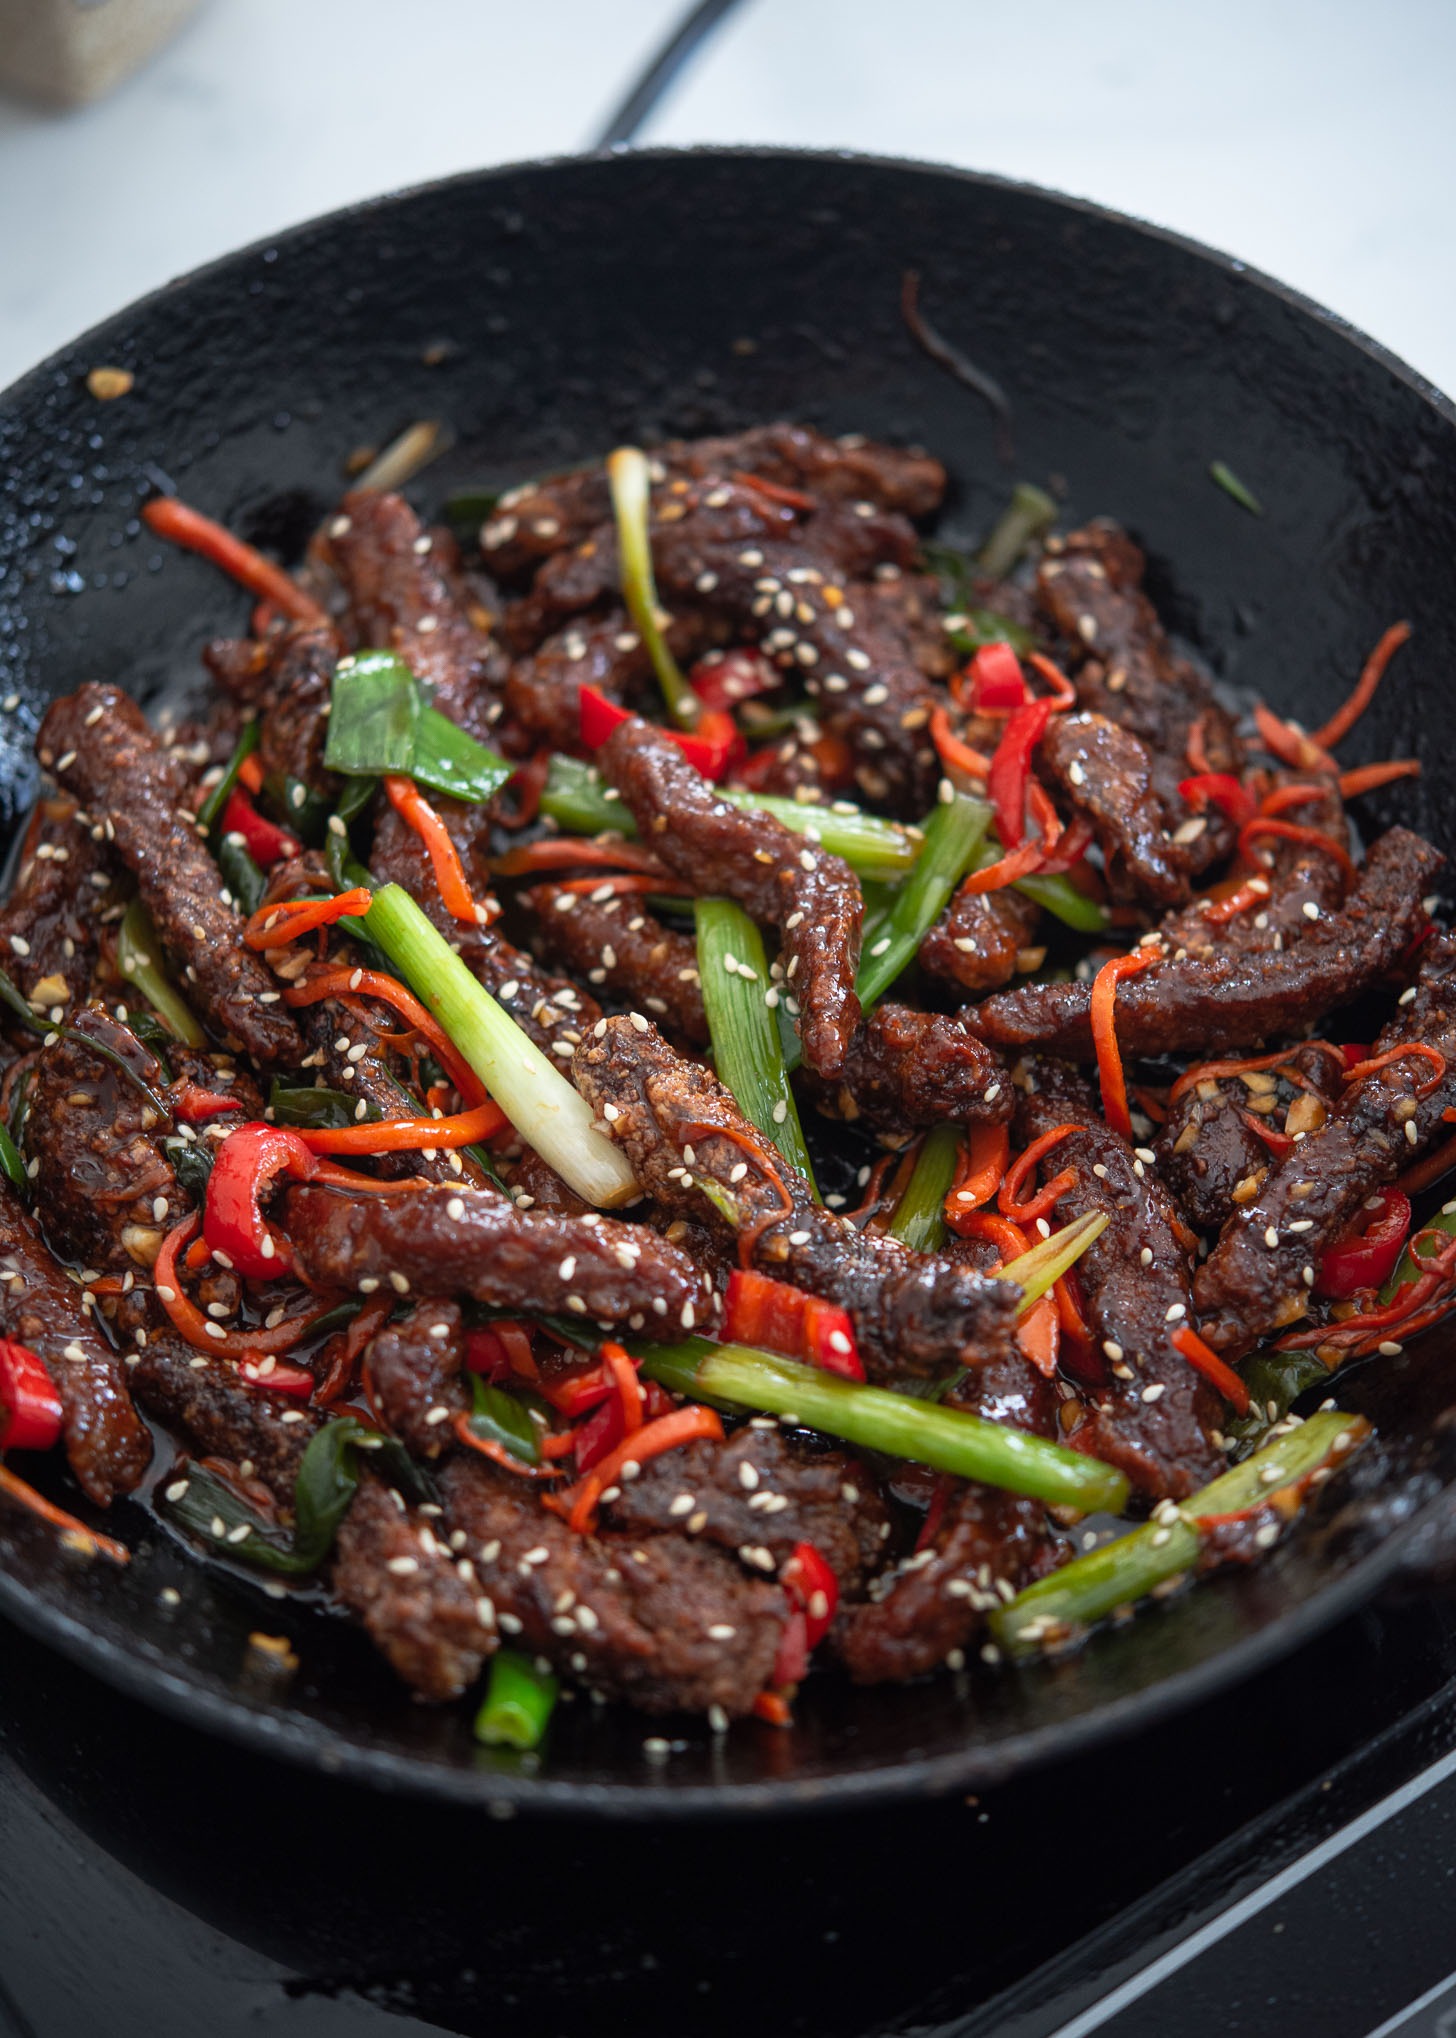 Garnish crispy beef with sesame seeds to finish off.